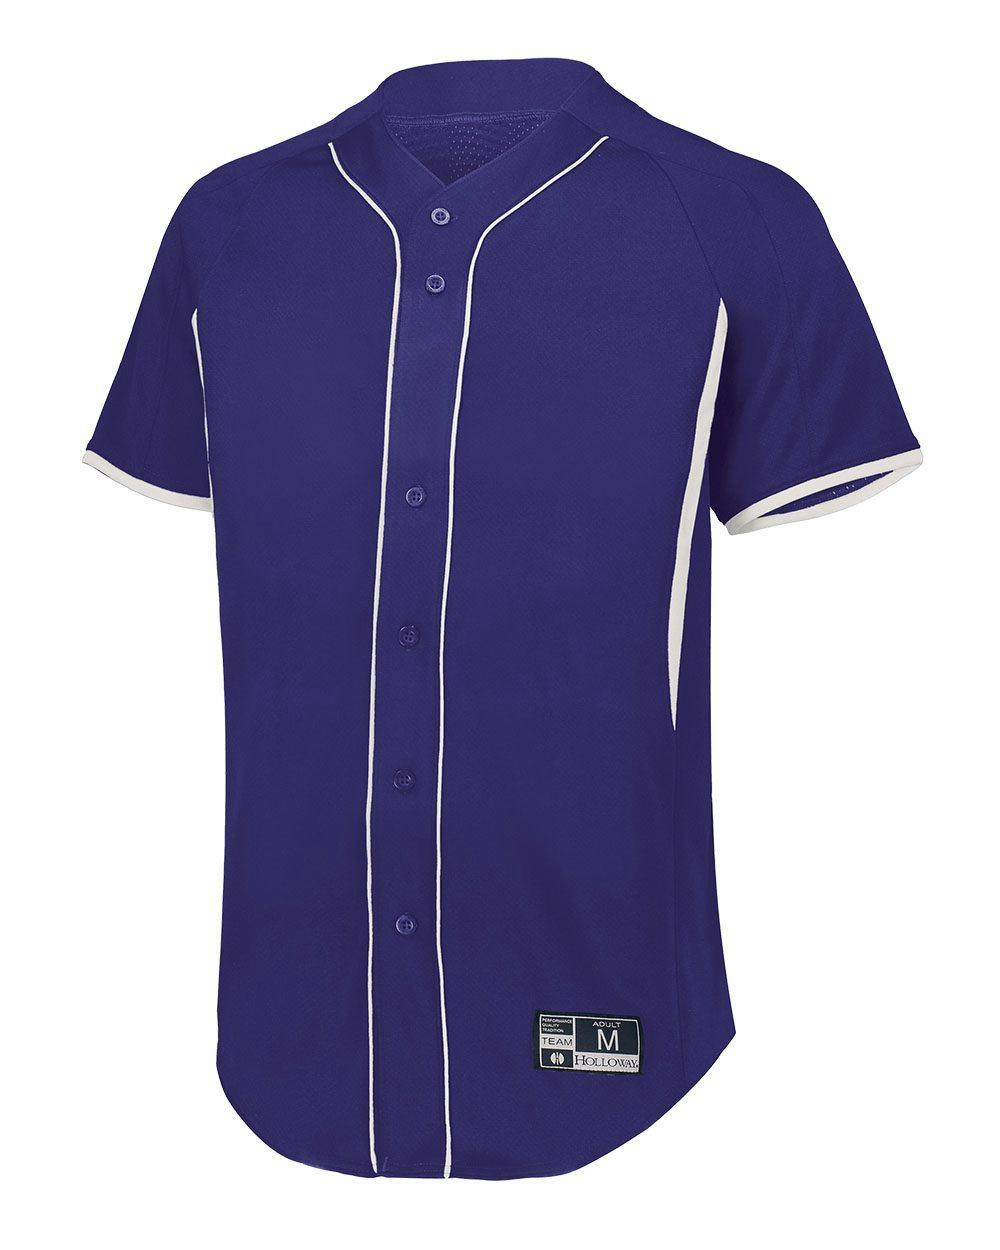 Image for Game7 Full-Button Baseball Jersey - 221025